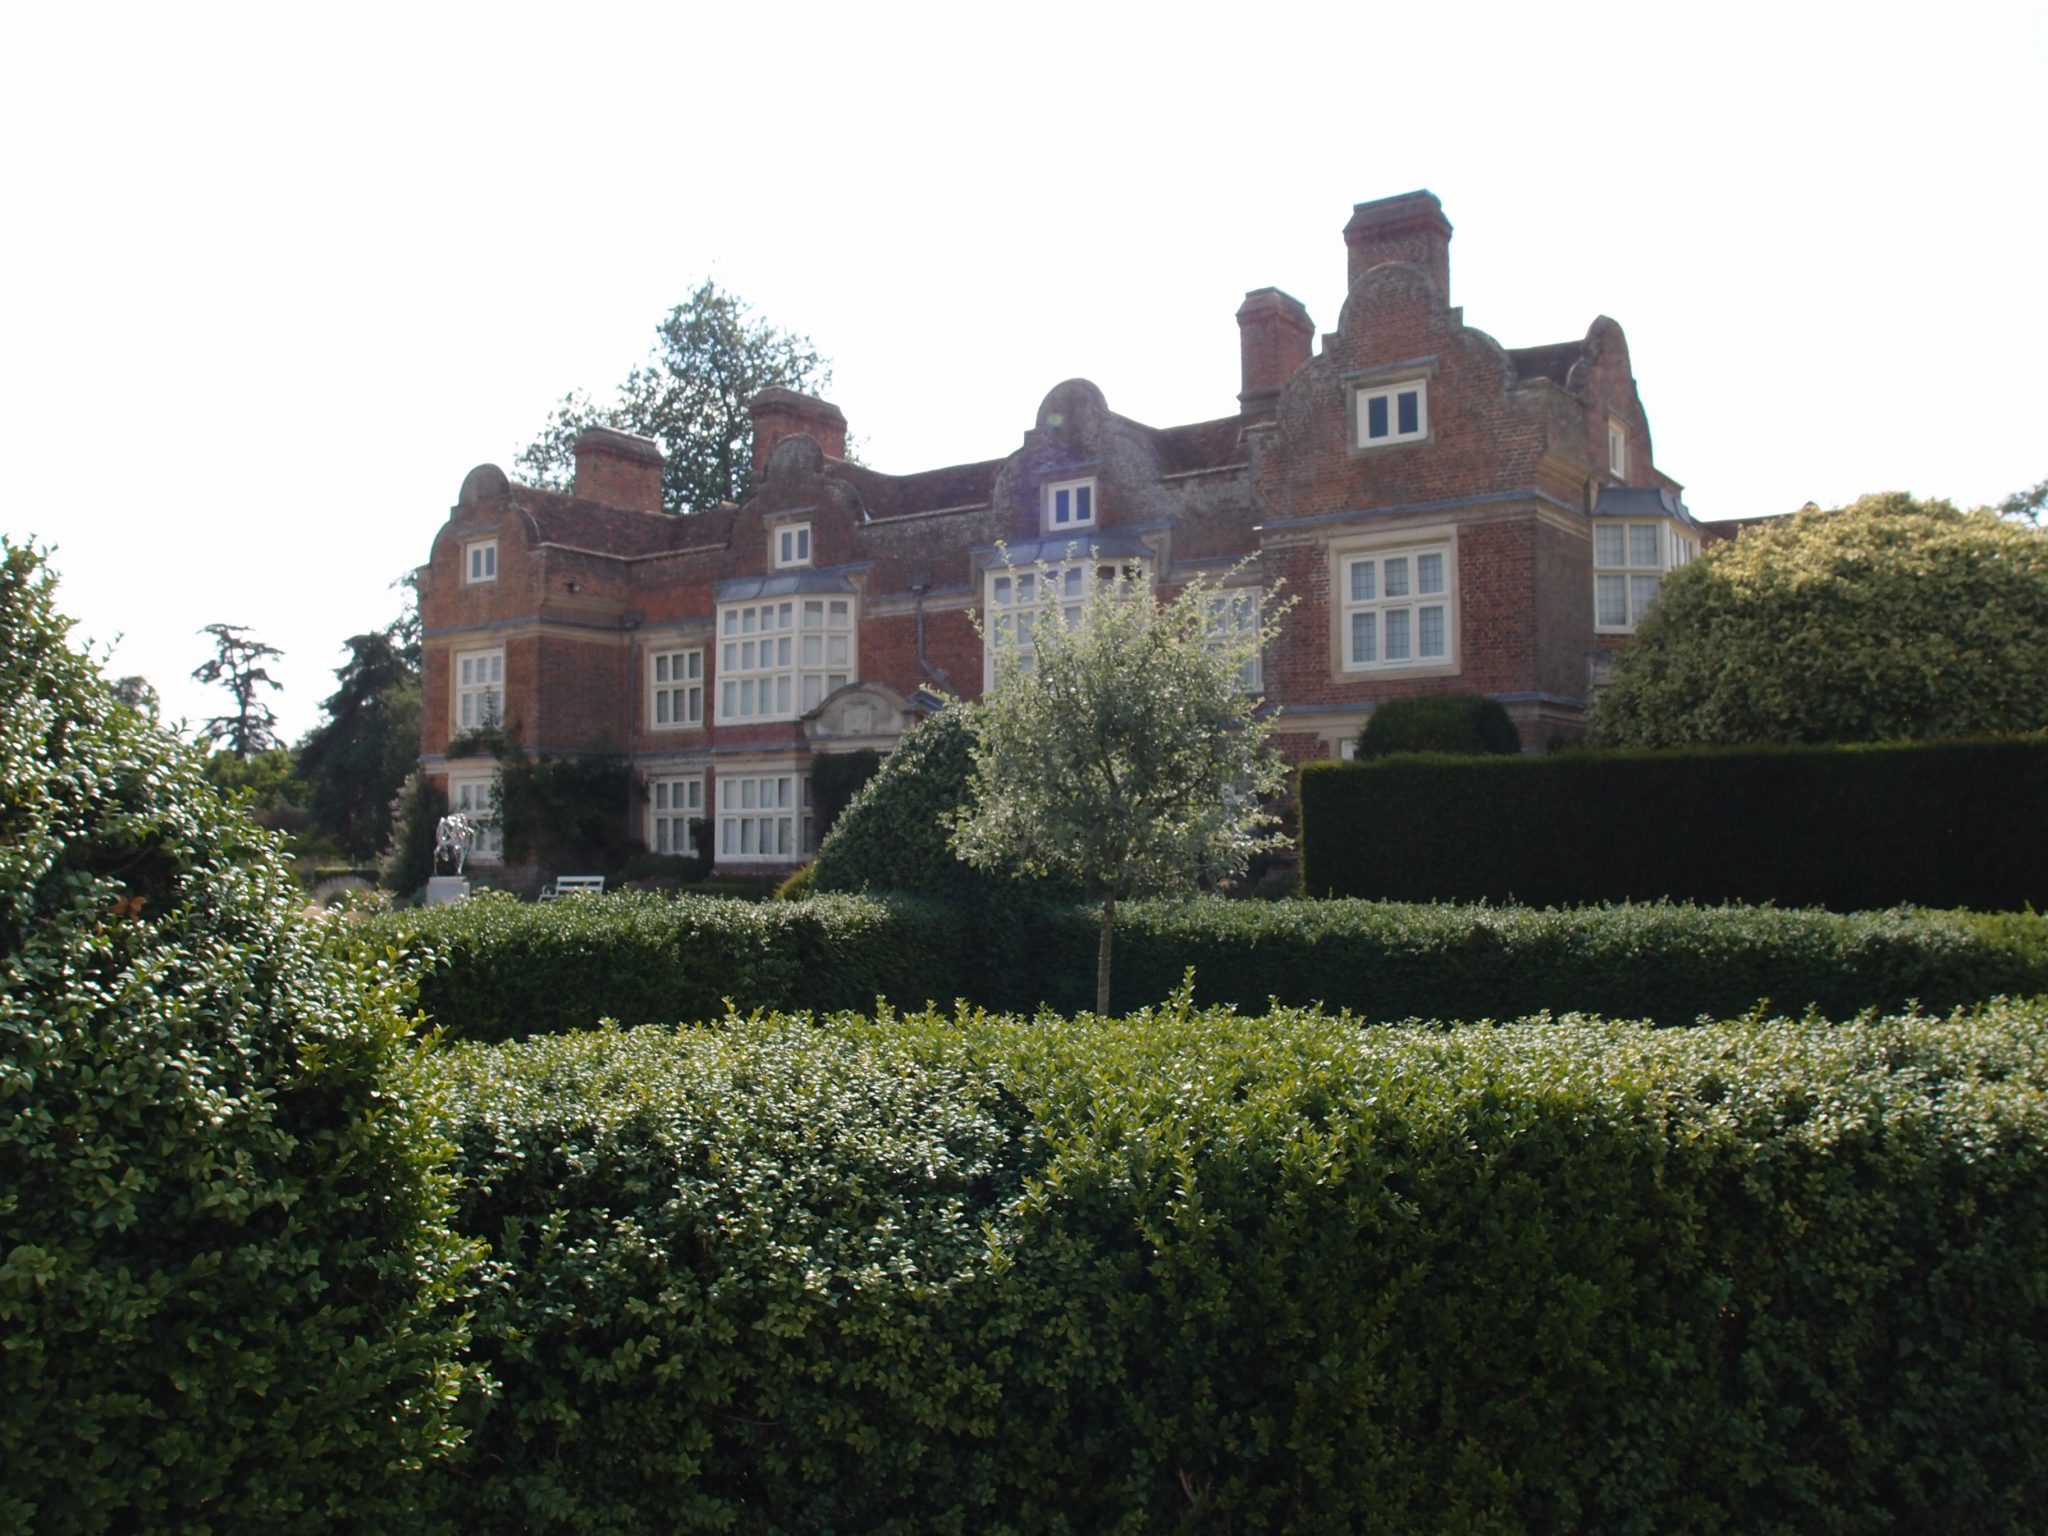 The East Face of the House, seen from within the Pan Garden